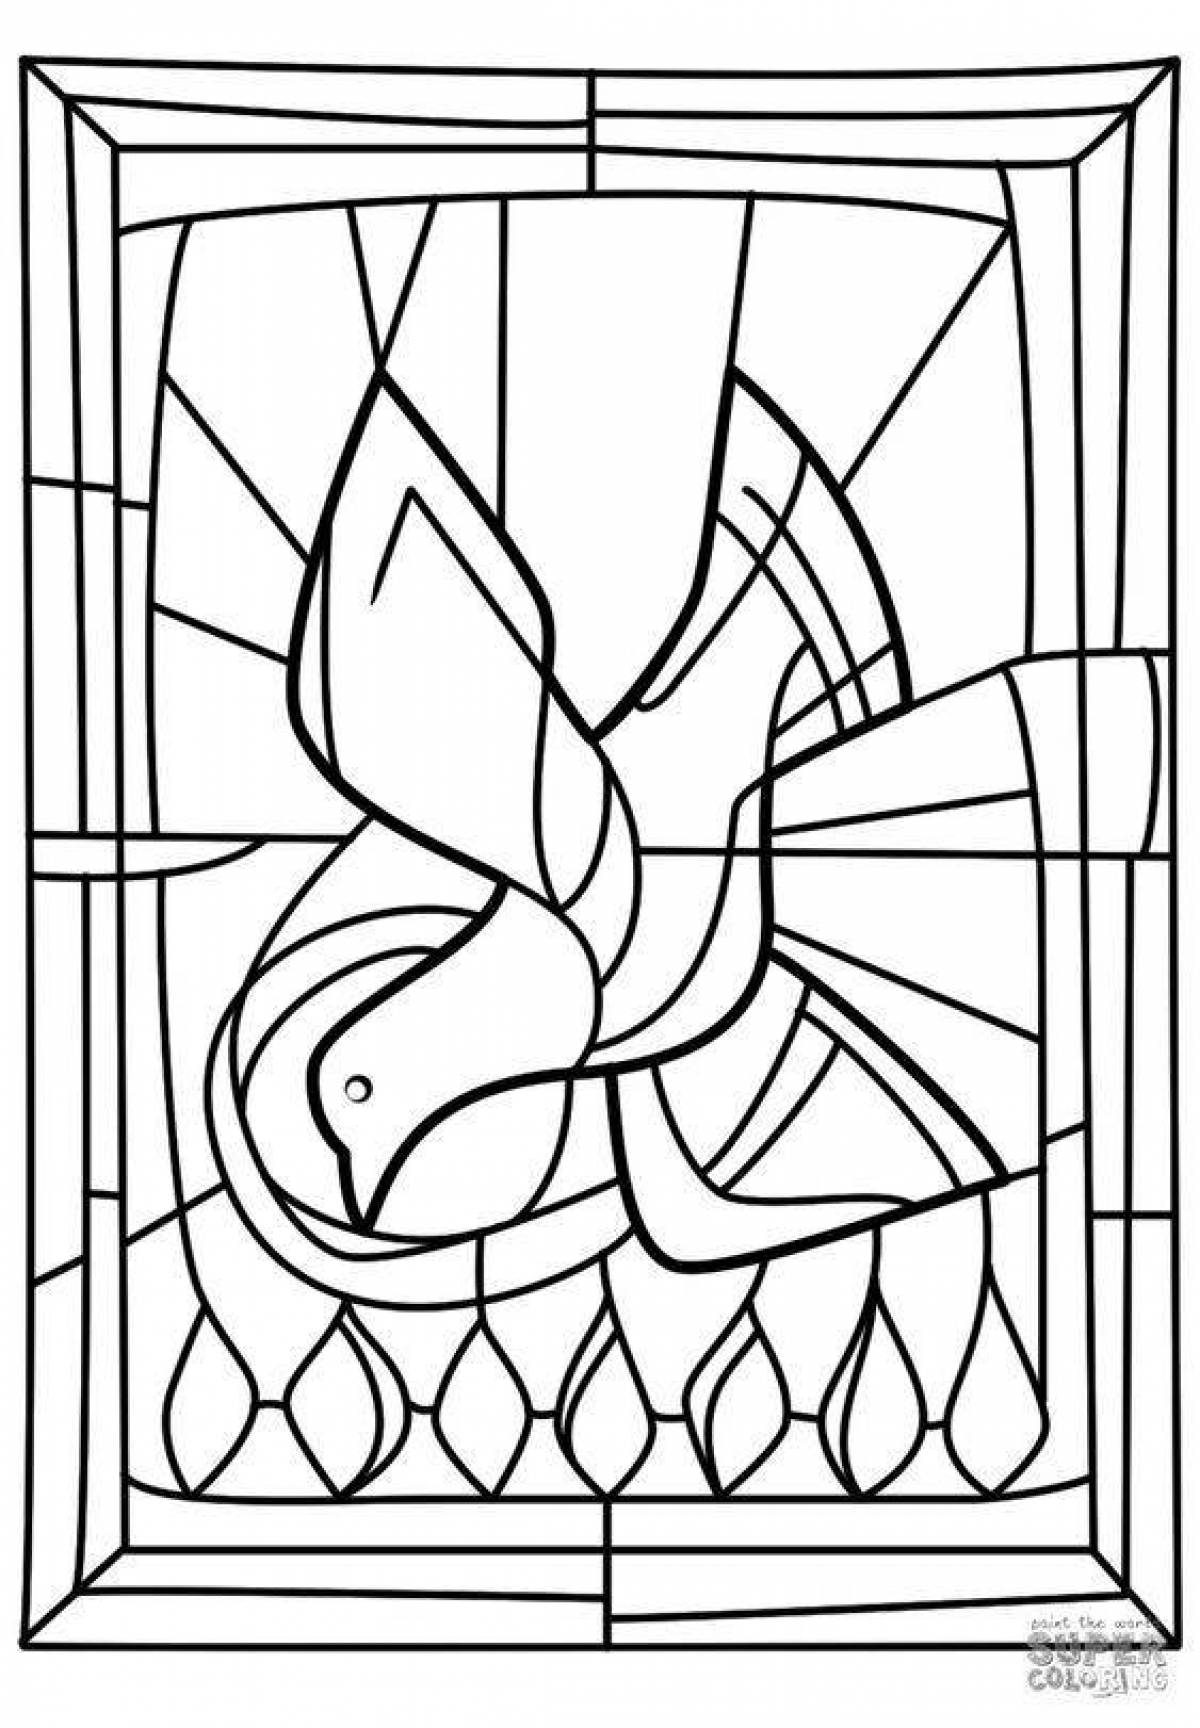 Adorable stained glass coloring page